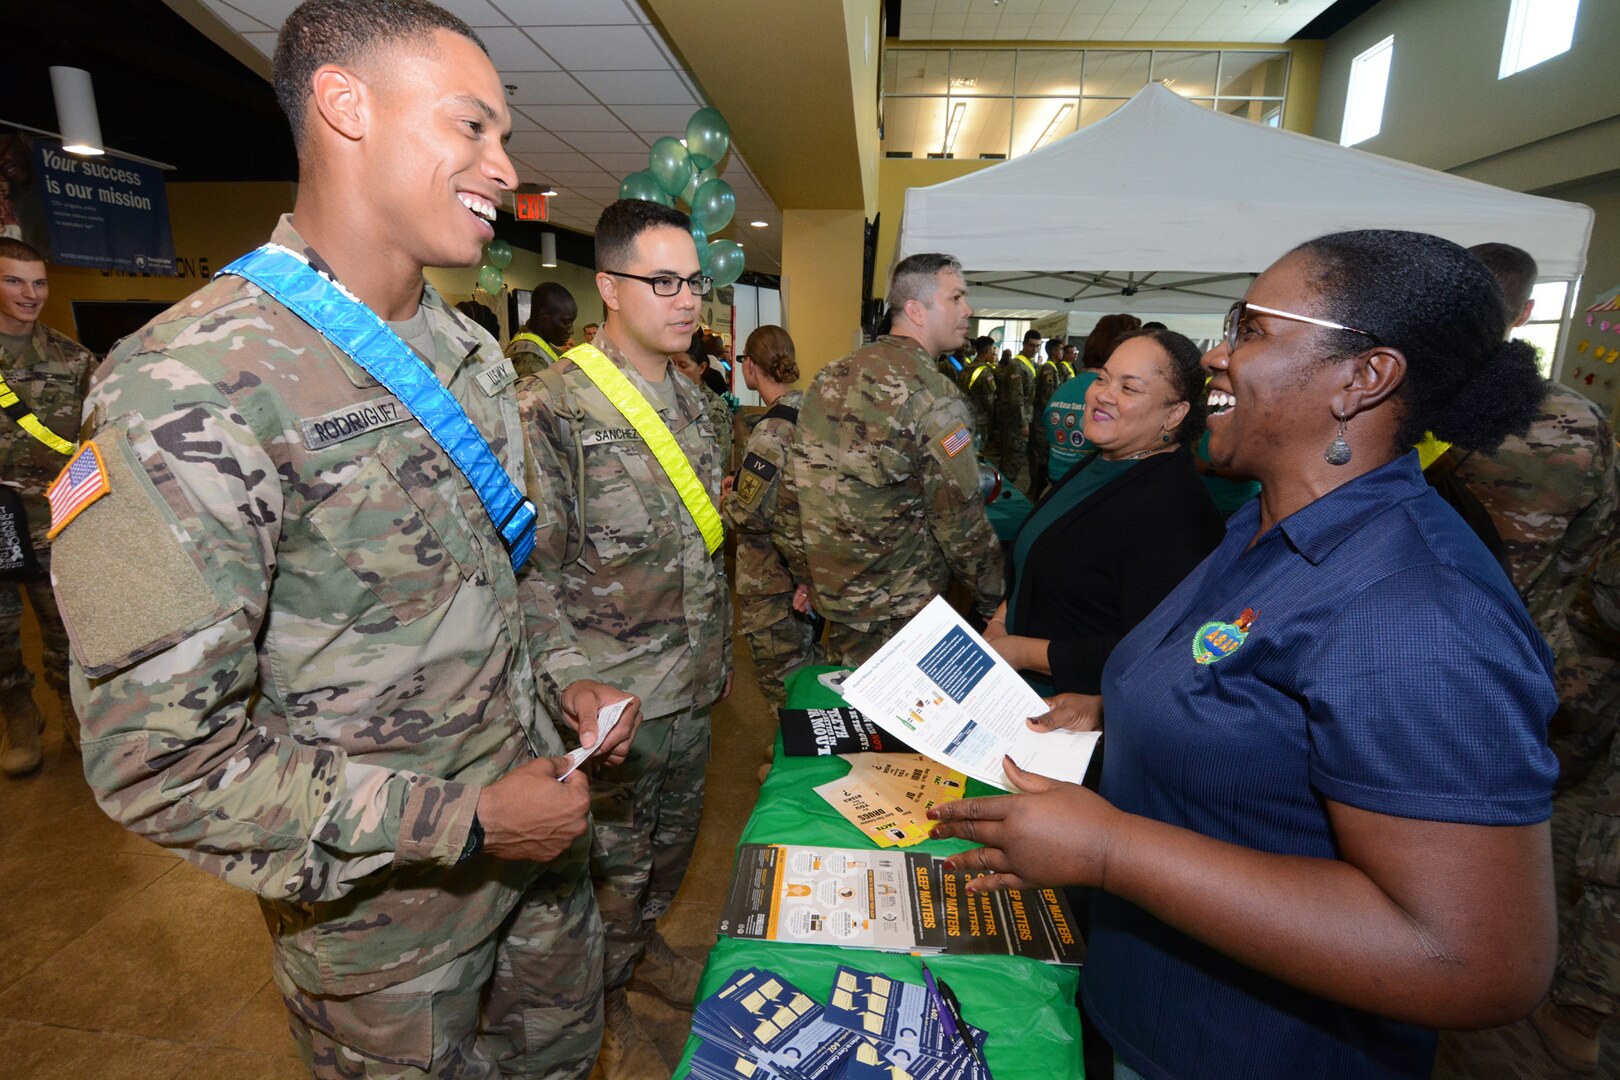 Volunteers from the Army Substance Abuse Program, or ASAP, hand out literature to Soldiers.